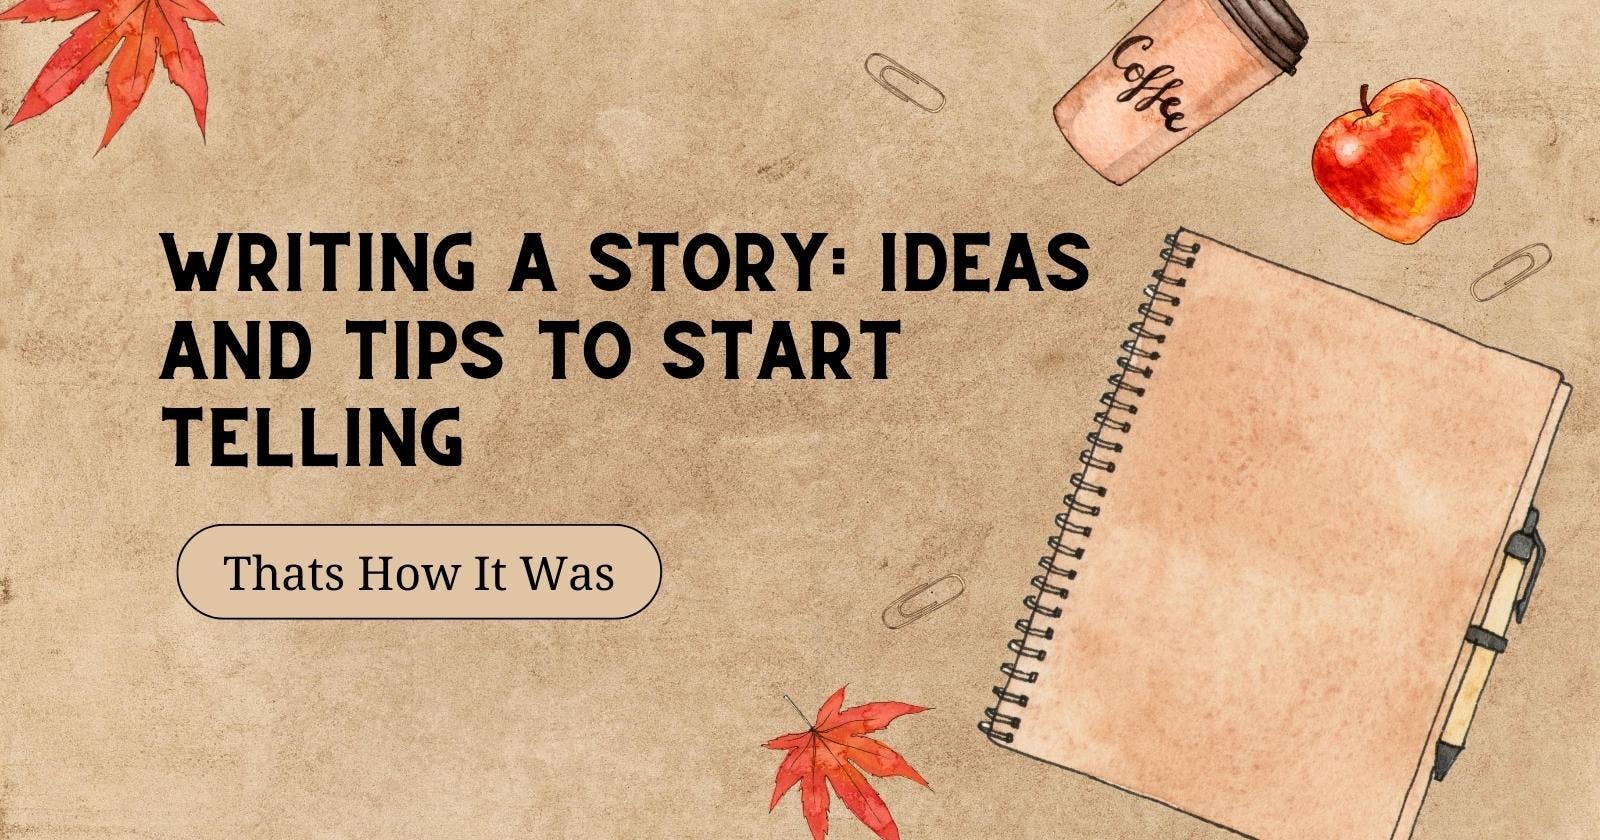 Writing A Story: Ideas And Tips To Start Telling